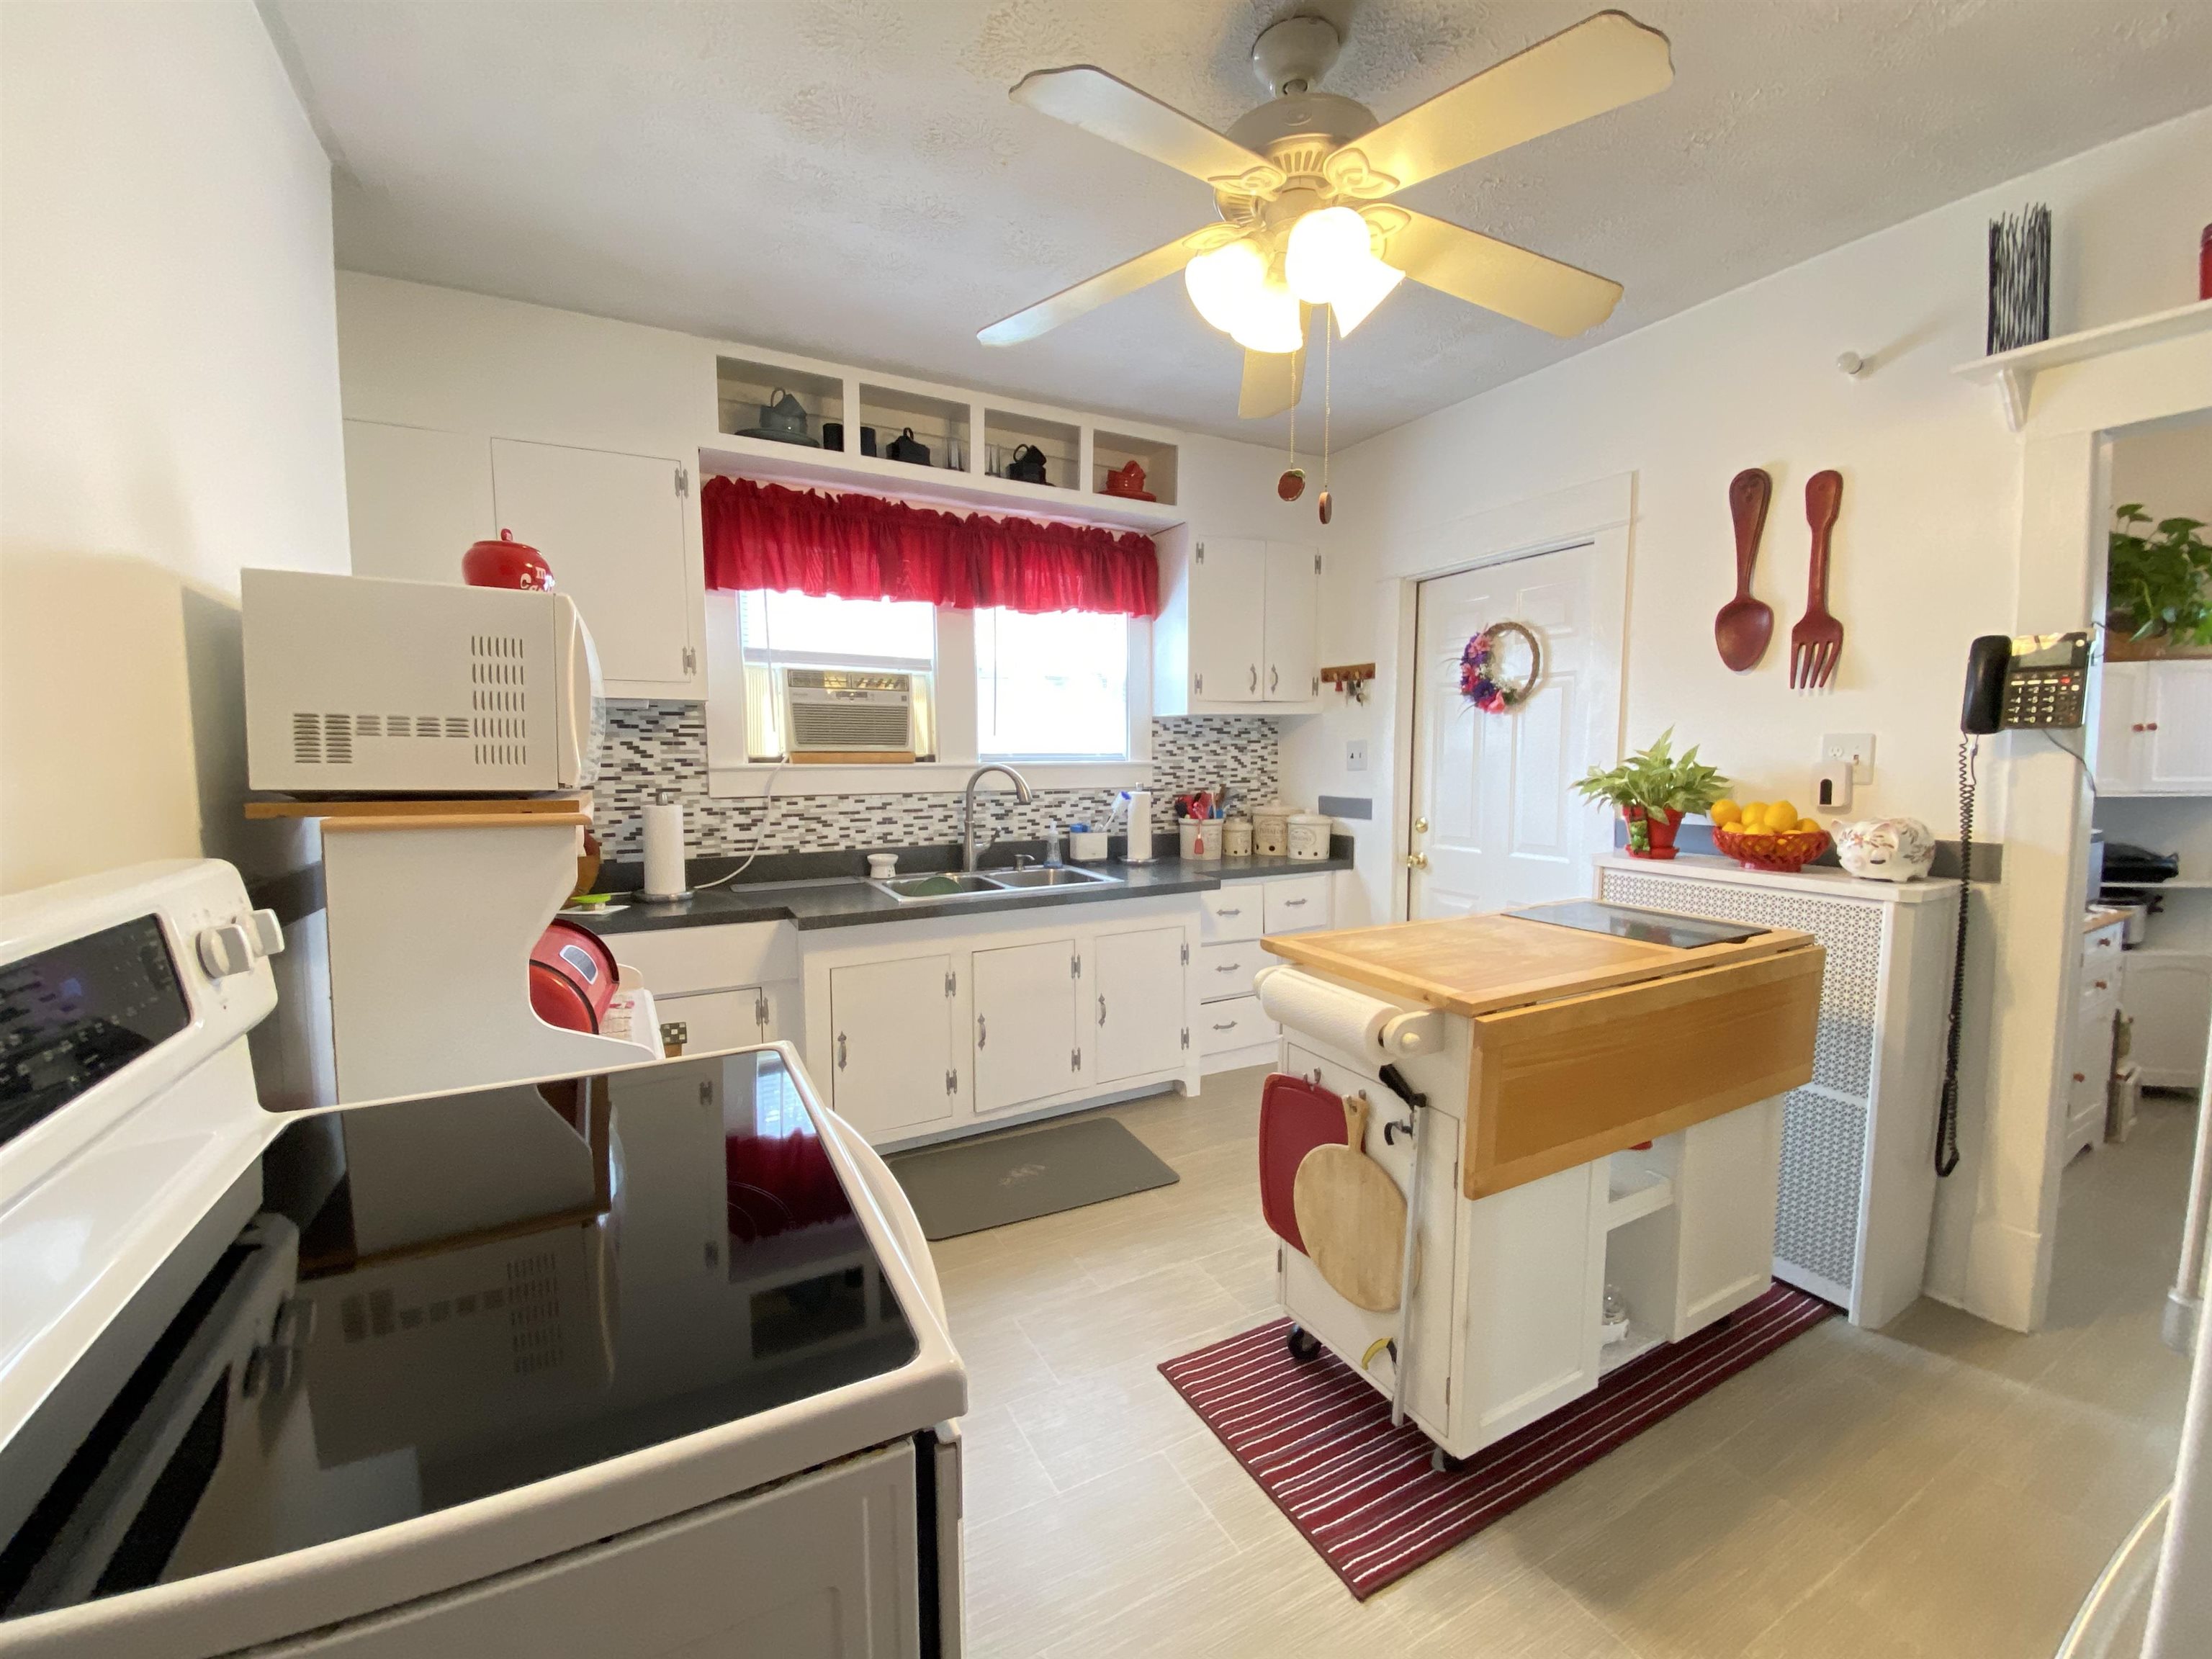 Kitchen with lovely decor - ceiling fan